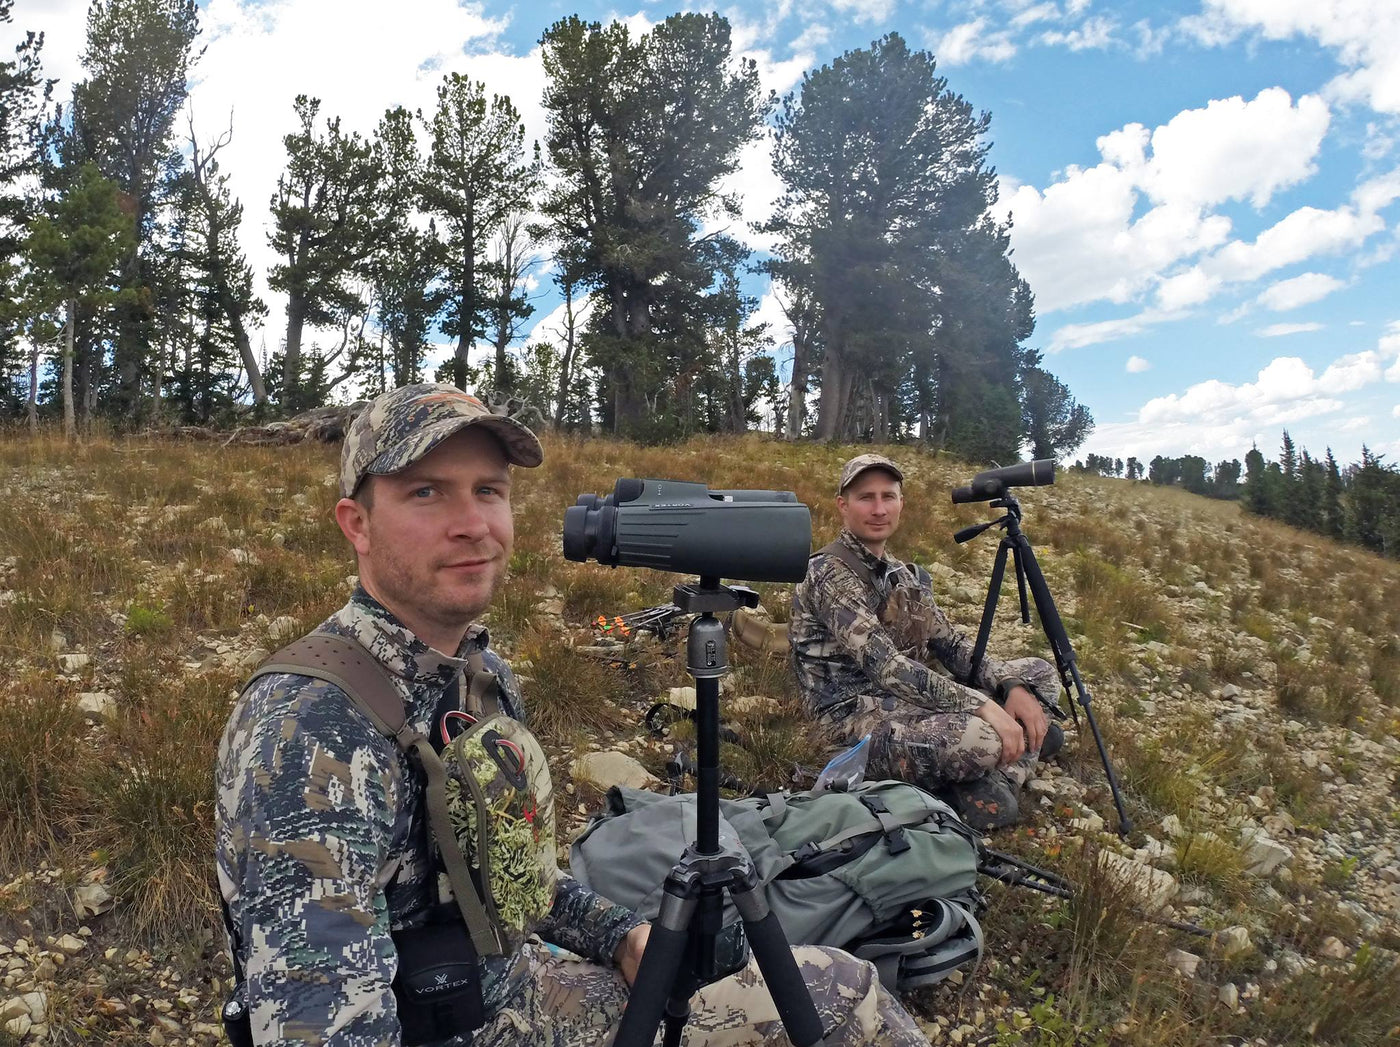 Using Binocular Adapters for More Effective Glassing